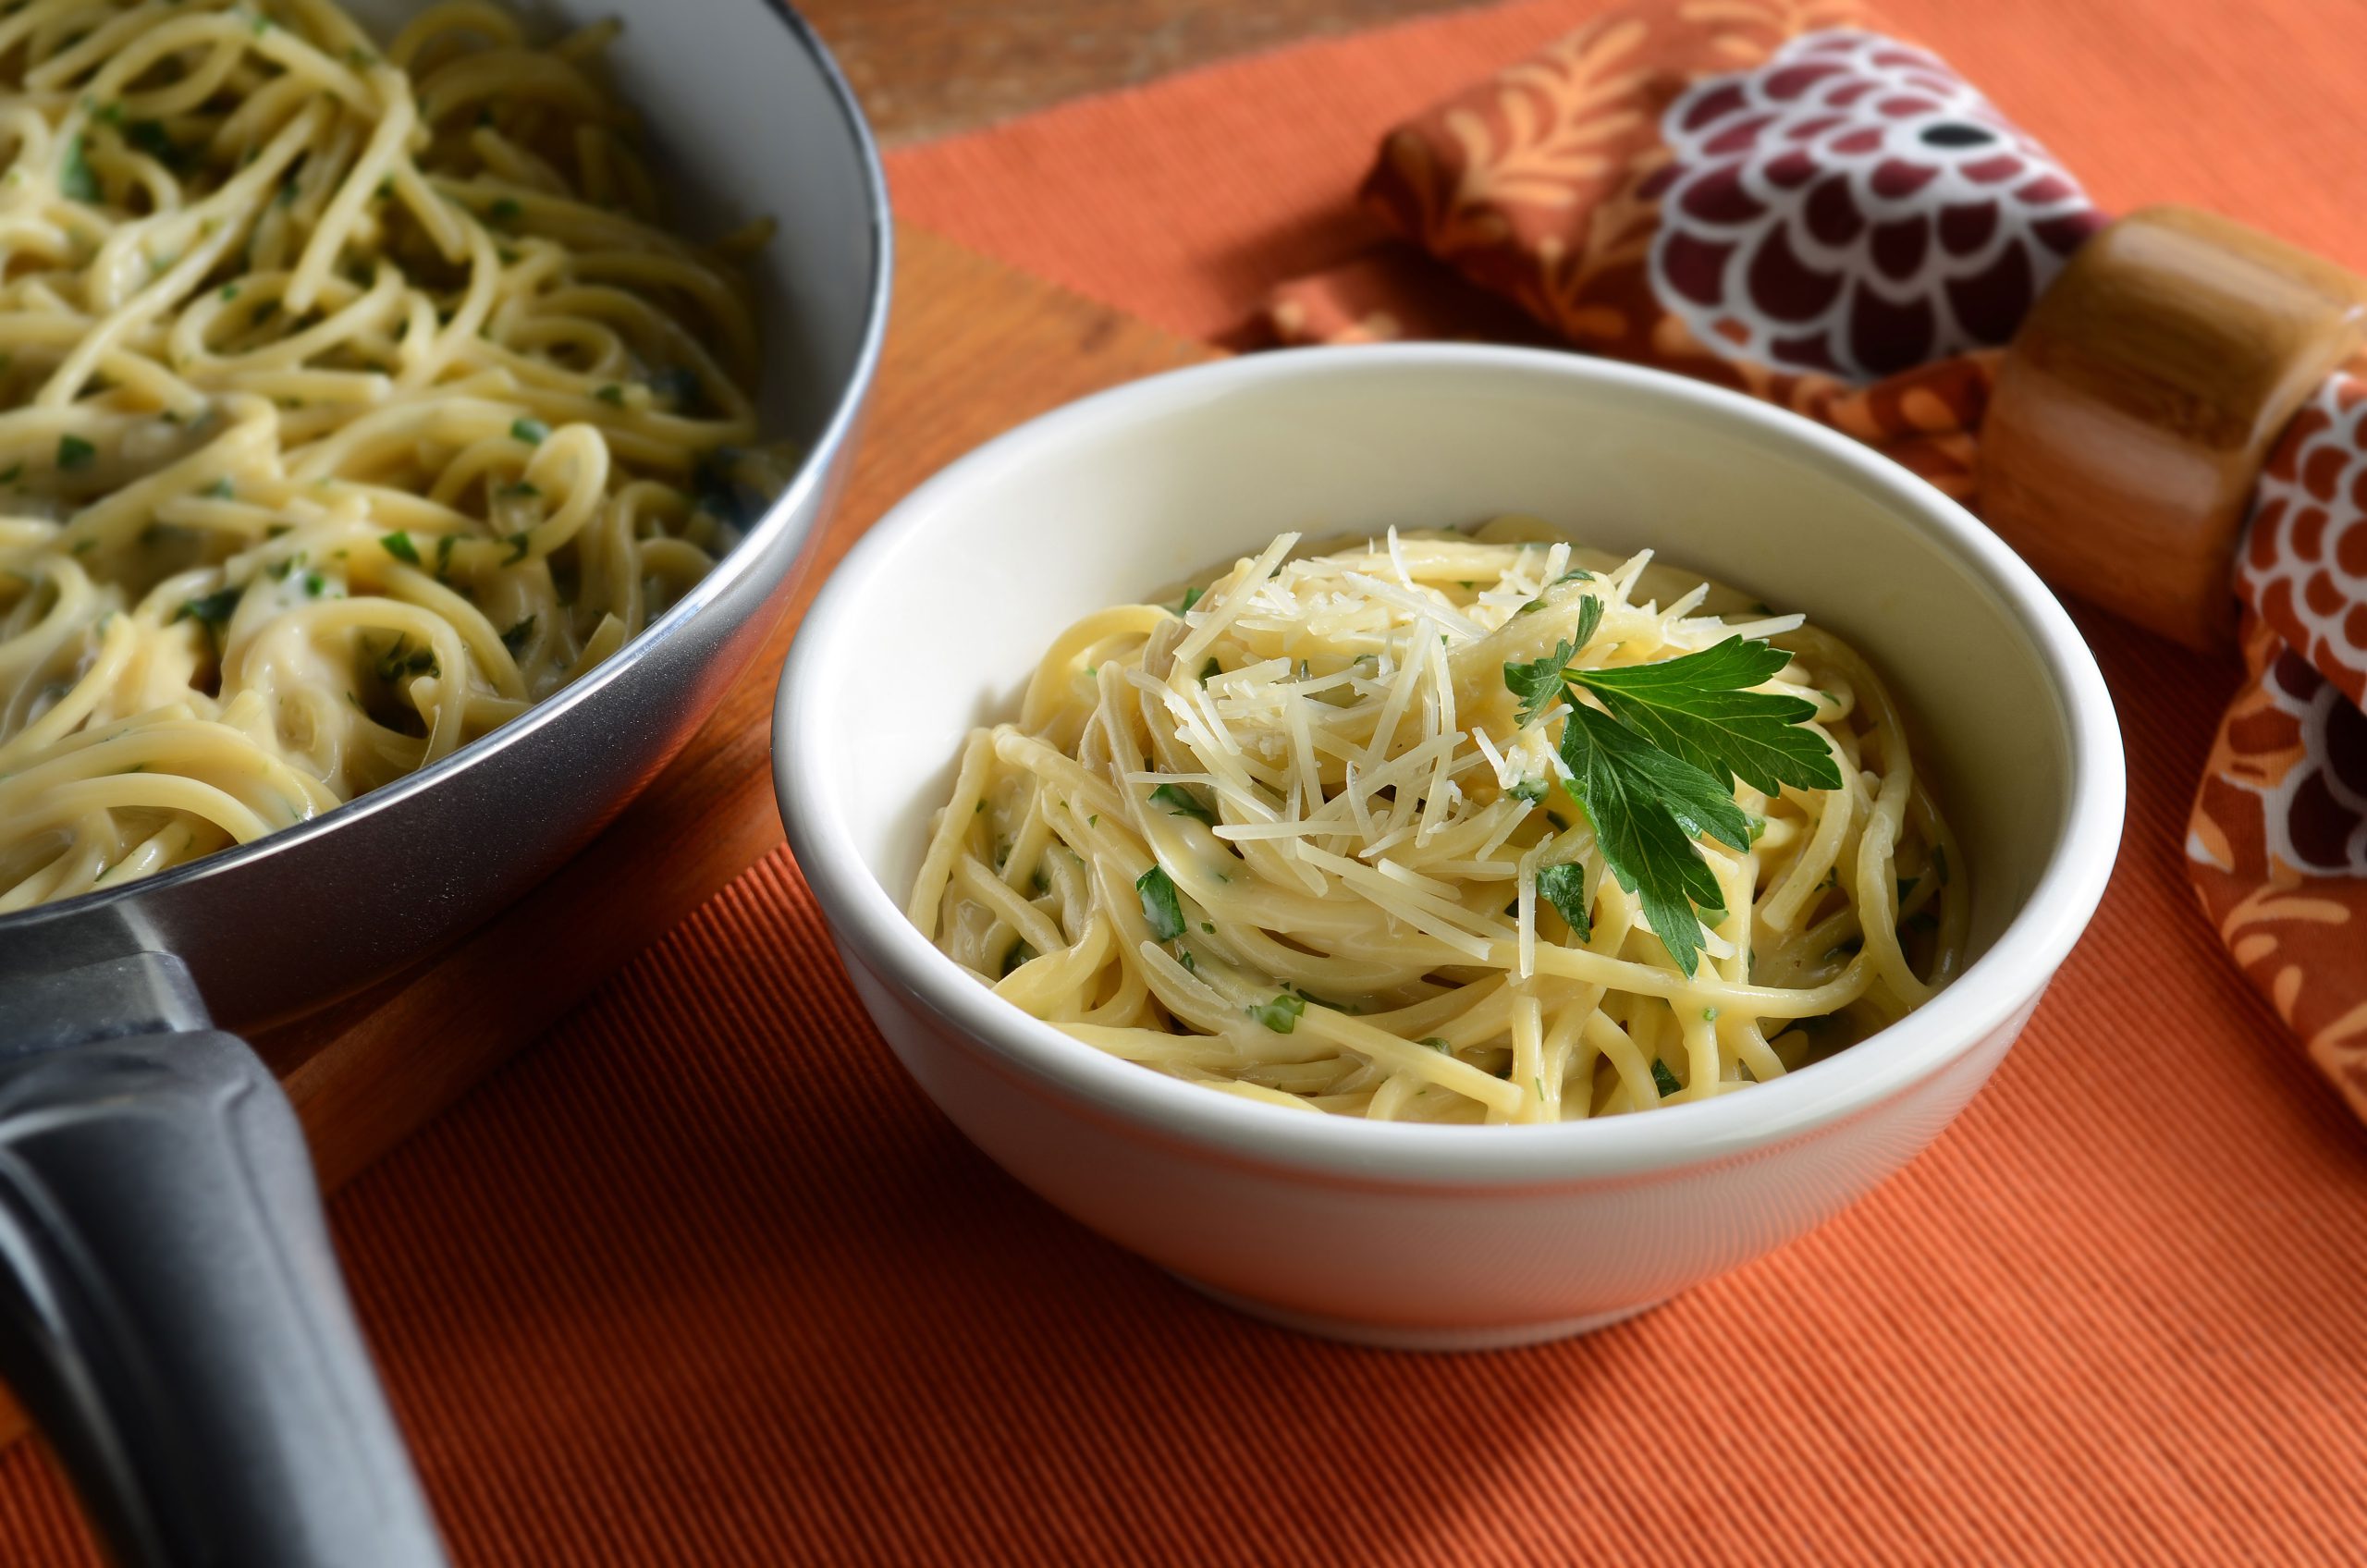 Herb linguine with Alfredo sauce, basil, and fresh parsley, topped with Parmesan